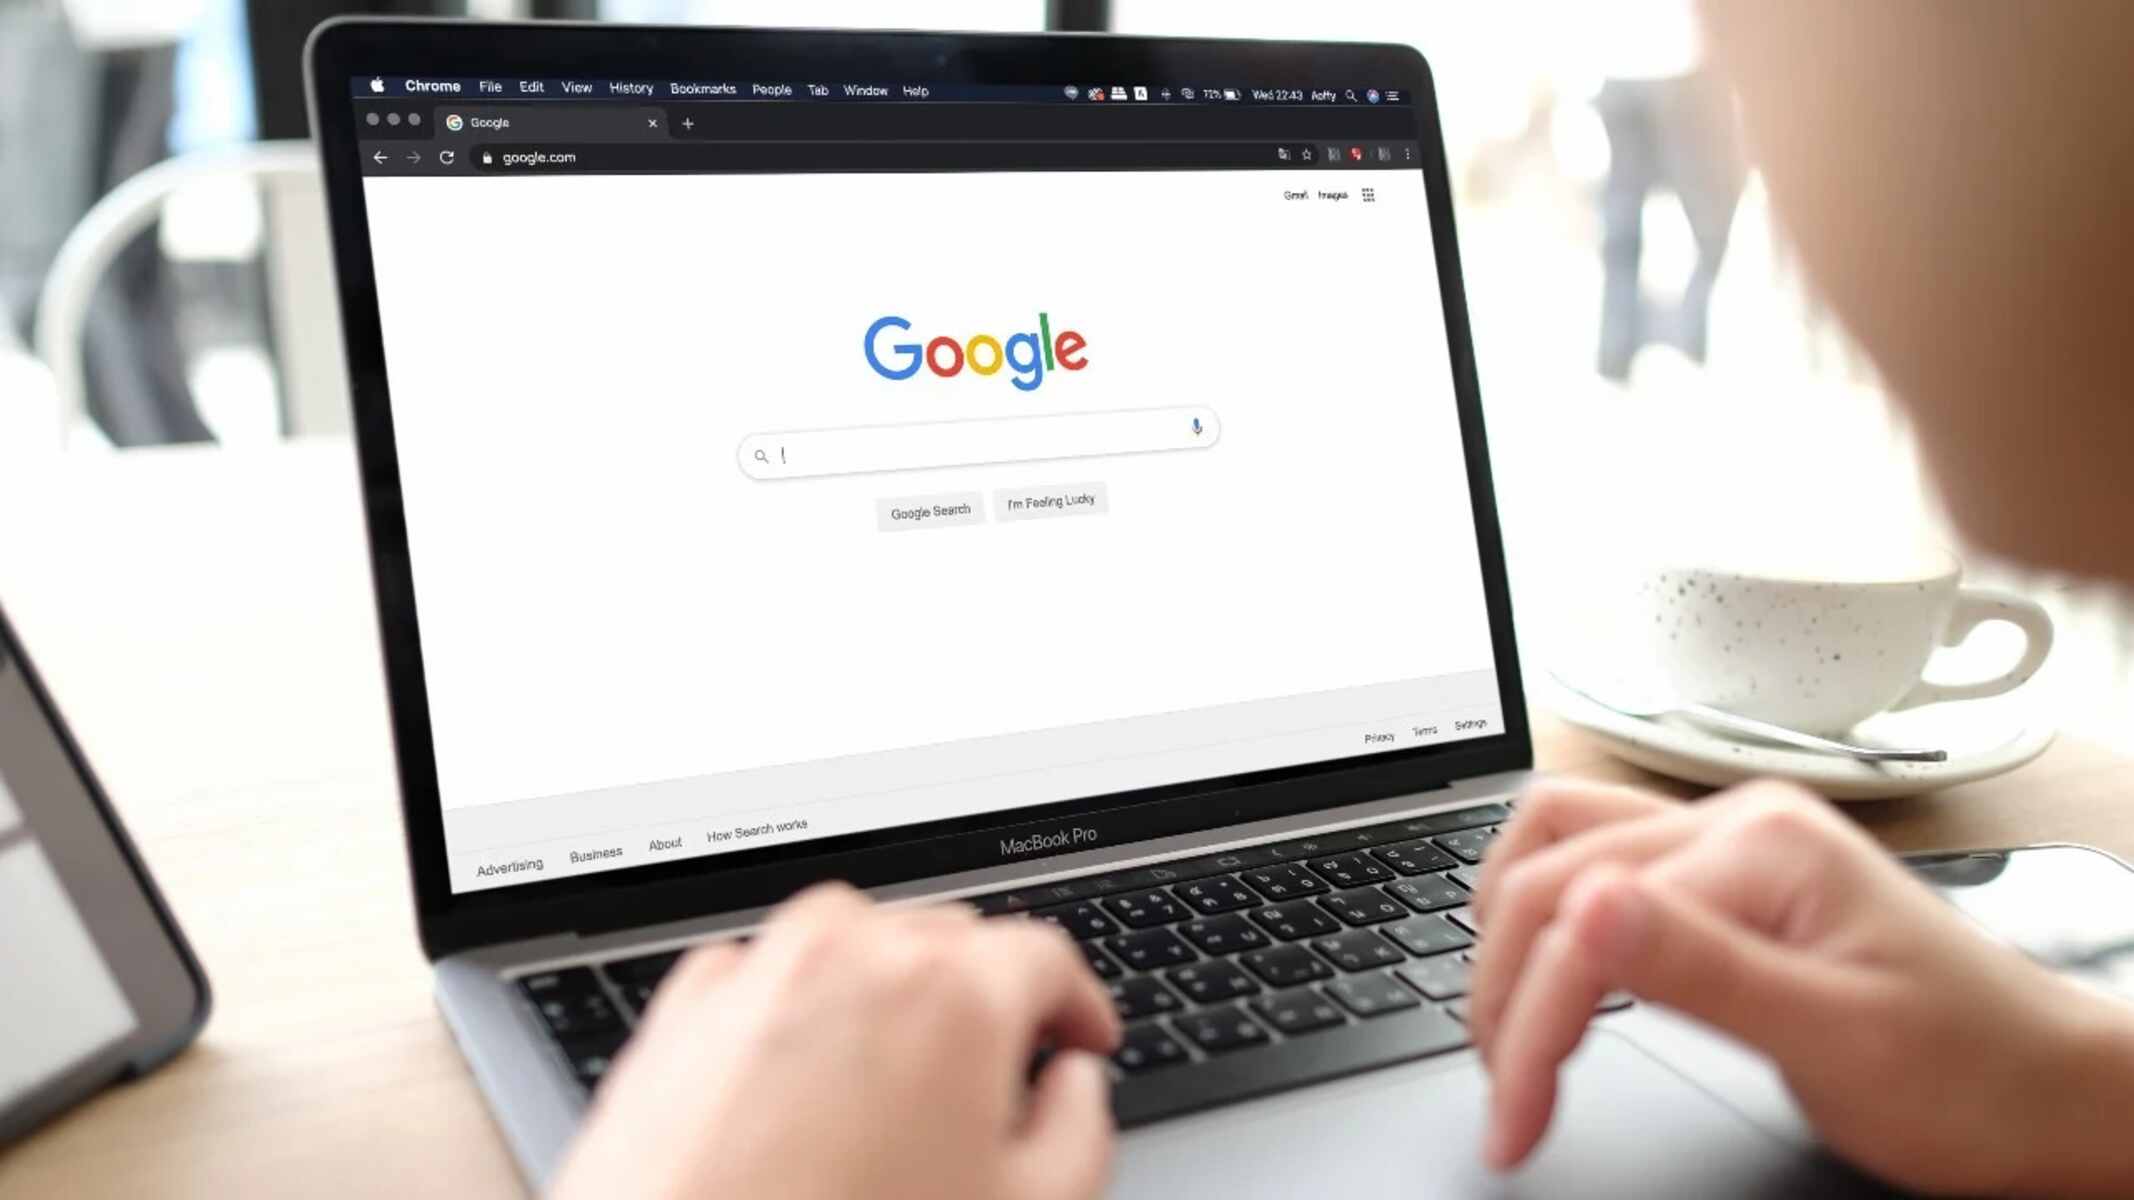 How To Change Search Bar Color On Chrome